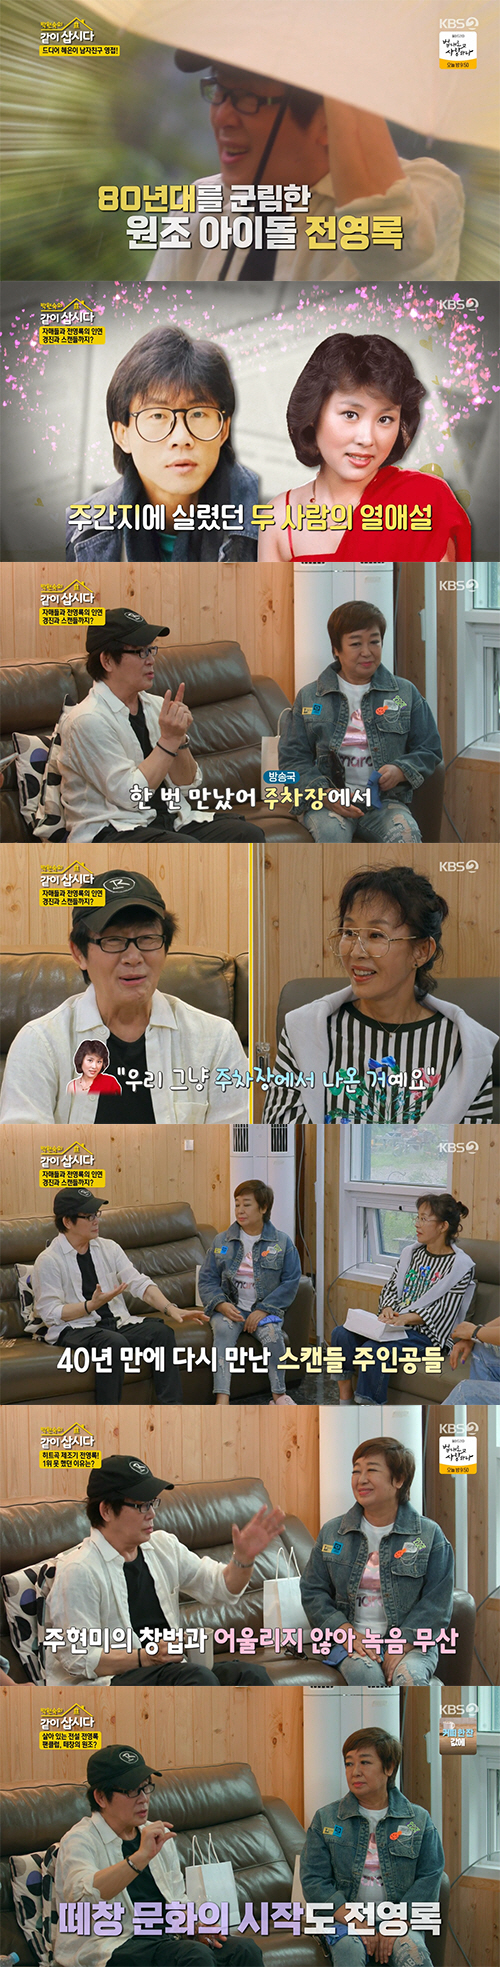 Singer Jeon Yeong-Rok opens up about Inscription with Actor Lee Kyung Jin after 40 yearsOn the 27th KBS2 entertainment program Park Won-sooks Lets Live together, Jeon Yeong-Rok visited Okcheon House with the invitation of Hye Eun Yi.Kim Chung had been calling her sisters in a loud voice since morning, and Kim Chung had ordered a huge amount of courier service to open an indoor stall.Its really good, my boyfriend is coming, said Hye Eun Yi, who laughed, saying, I think Cheongi thought it was my boyfriend today and ordered it.Lee Kyung Jin saw the kettle and saw the kettle go on the spot, saying, The kettle should be a little crushed.The sisters tried to complete the spore wagon by joining together, but they showed a clumsy appearance, and Kim Chung laughed with a positive appearance saying, Lets just do it.Park Won-sook wondered about the identity of Hye Eun Yis boyfriend, and Lee Kyung Jin asked, Singer?Hye Eun Yi said, Then would you like to be a Singer Actor? But Park Won-sook laughed, referring to Hye Eun Yis ex-husband, saying, No, I lived with Actor.The one who came to the sisters was the 80s aid idol Singer Jeon Yeong-Rok.Jeon Yeong-Rok, who entered the house, quipped, Is this broadcasting now, its so natural that I dont know if its broadcasting.Kim Chung asked, Has Jeon Yeong-Rok ever worked with Lee Kyung Jin? And Jeon Yeong-Rok surprised the sisters by answering, We were in the process of inscription.Lee Kyung Jin said, We have never met personally, and Jeon Yeong-Rok said, I met once at the station Car Parking.After that, Jeon Yeong-Rok and Lee Kyung Jin said, We just came out of Car Parking.Jeon Yeong-Rok surprised the sisters by saying Write love in pencil also had the original owner.It turned out that this song was Joo Hyun-mis song, but Jeon Yeong-Rok visited the composer and asked for a song, and said, I will sing it hard.When there was no actual Fan club, Kim Chung informed him that he was surprised to see Jeon Yeong-Roks Fan club, and Jeon Yeong-Rok said, It was the beginning of fandom.When I handed the demo tape to Fan club, my fans followed me, and other singers followed me. Jeon Yeong-Rok also said, I did all the genre except trot, but trot only presents songs.Hye Eun Yi said, Hit the jackpot! for giving Kim Hee-ae a song, and Jeon Yeong-Rok said, Kim Hee-ae is a junior at School.I gave him a song because he said, You know, youre a senior.Jeon Yeong-Rok said, Yoo Hyeon-sang also said, Give me a song to my student. So I asked who it was, and it was Lee Ji-yeon.So I gave Wind Stop and I was in the top spot for five consecutive weeks. In addition, Jeon Yeong-Rok unearthed the Yang Soo-kyung and released a story that presented Love is like rainwater outside the window.Jeon Yeong-Rok then surprised everyone once again by saying that he made a sorry person known as Kim Ji-aes song to give Joo Hyun-mi to repay Write love in pencil.I made my debut as an actor, said Jeon Yeong-Rok.But I did a song at the time, but I contacted the record company and made an album. My father and mothers halo had been crushing me.So I tried to do anything, he said, referring to Actor Yellow Sea, the father of Jeon Yeong-Rok, and his mother Singer Baek Sul-hee.Park Won-sook asked, What do you want to eat today? and Jeon Yeong-Rok applauded the sisters, saying, Im going to sing 7080 songs and make Tteok-bokki.Jeon Yeong-Rok started making Tteok-bokki with his best friend Hye Eun Yi but was seen tumbling and laughed.The two were not intent on making Tteok-bokki, and Kim Chung and Lee Kyung Jin were installing indoor tanks in the yard.Sisters who tasted the Tteok-bokki of Jeon Yeong-Rok were praised as really delicious.Lee Kyung Jin wondered about the recipe and laughed, saying, I will make it a shochu snack.While eating Tteok-bokki, Jeon Yeong-Rok said of cancer rumors, I was a middle school student with Lee Hong-ryul, but I went to colonoscopy with him and found a polyp.The doctor said, This is cancer. Later, I went to the broadcast with Lee Hong-ryul and talked about it. In the middle, Lee Hong-ryuls words made me edit and eventually rumored that cancer was circulating.So I sucked my fingers, he said, laughing.Jeon Yeong-Rok, who visited the so-called Pocheong carriage, showed the first stall in life and showed an emotional concert that can not be seen anywhere in the autumn night.Jeon Yeong-Rok presented the application song as well as a 50-year-old Jigi Hye Eun Yi and a fantasy duet performance that was not easily seen.